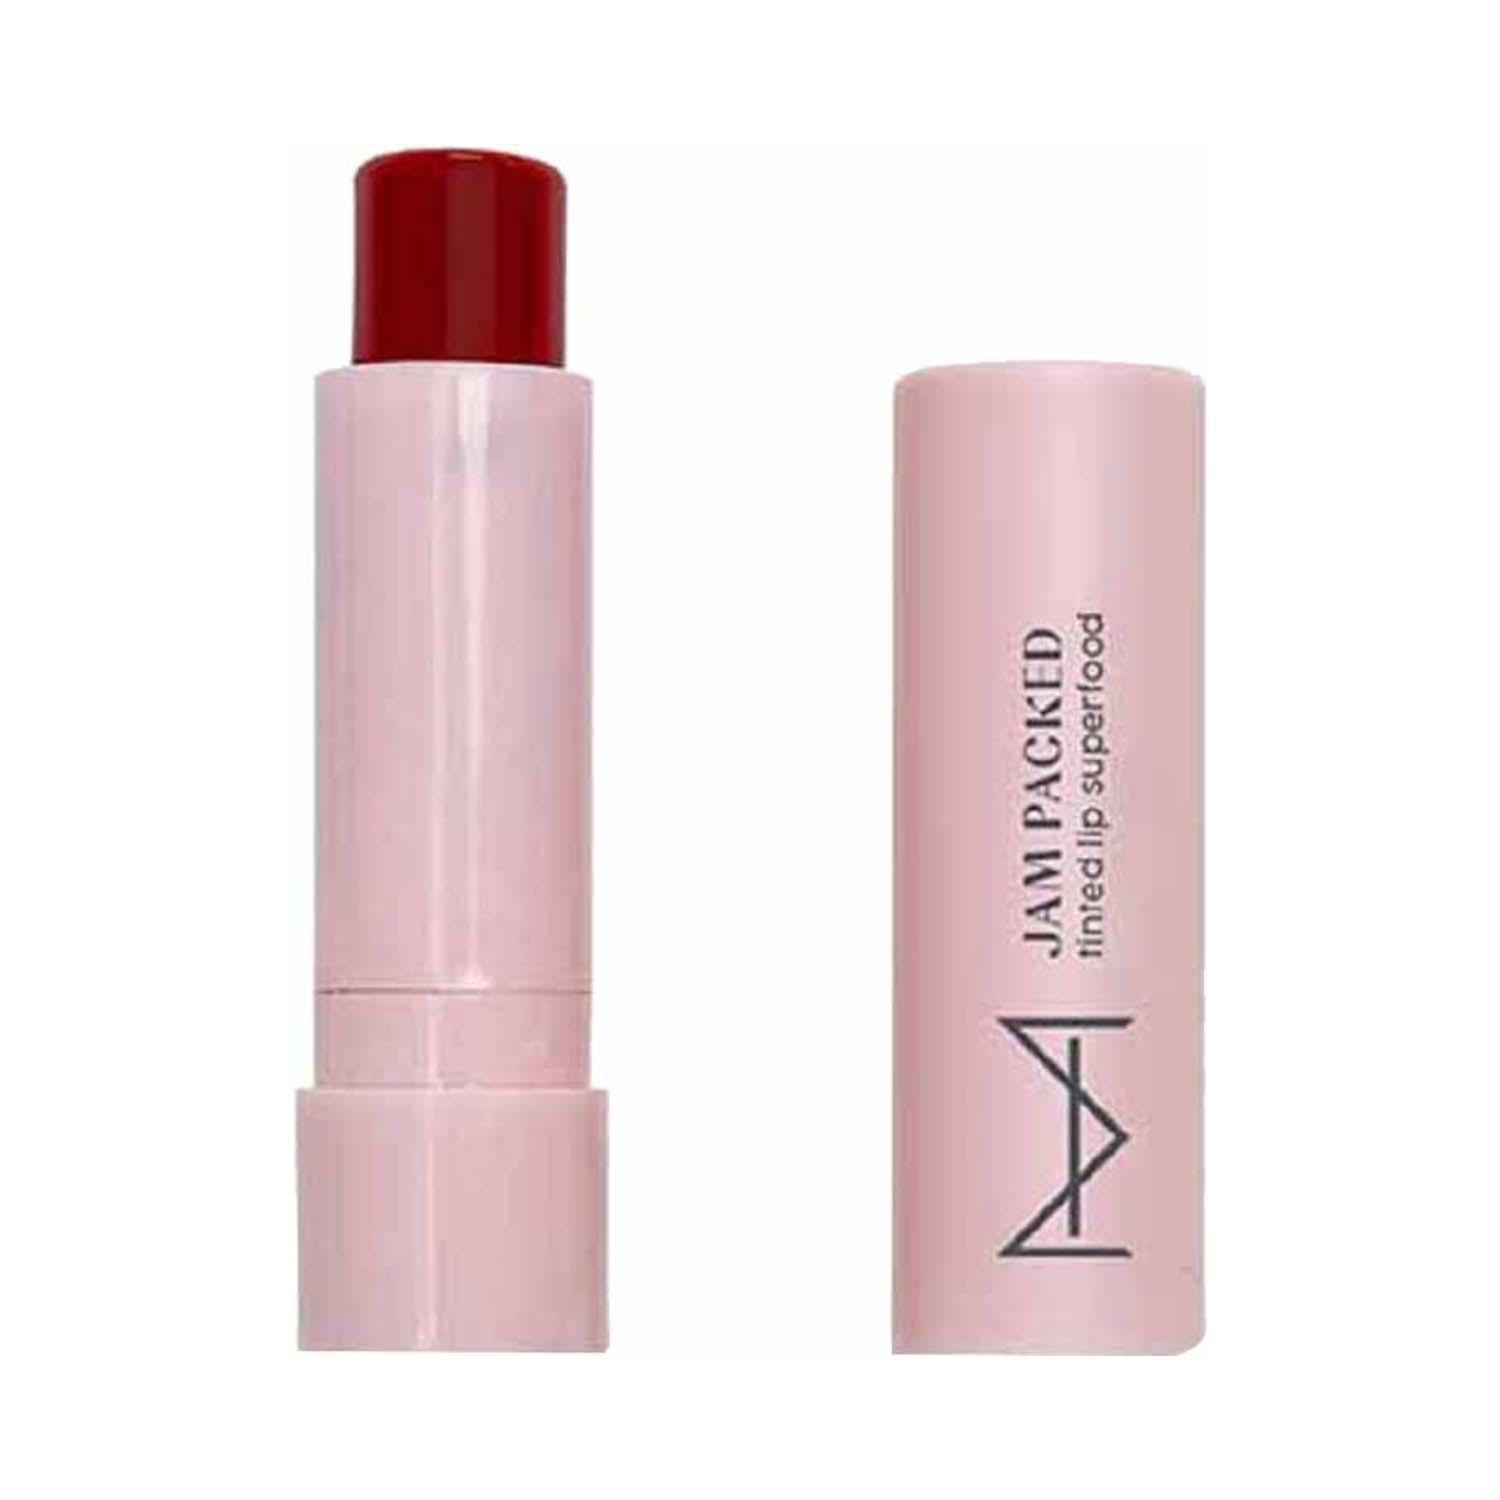 HOUSE OF MAKEUP | HOUSE OF MAKEUP Jam Packed Tinted Lip Superfood - Fresh Plum (3.8 g)